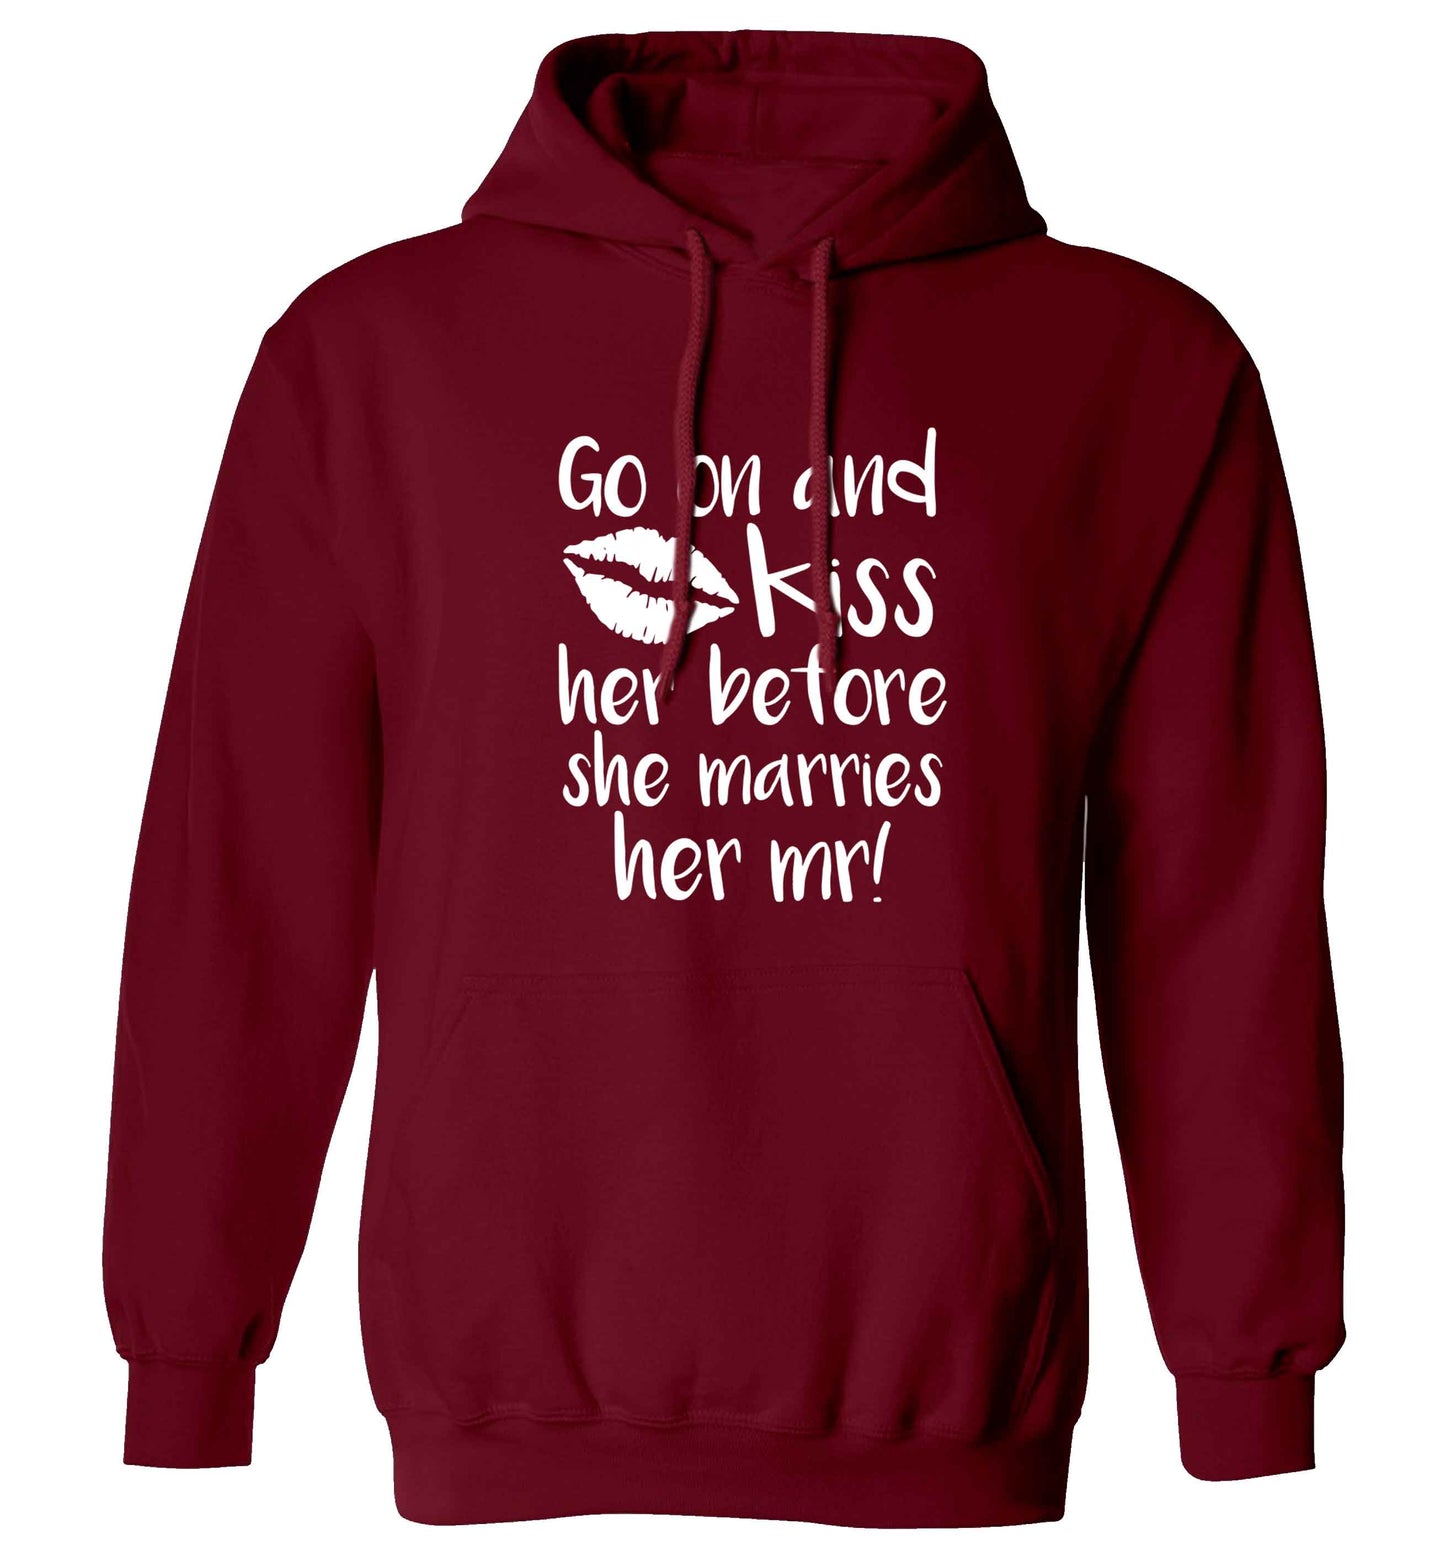 Kiss her before she marries her mr! adults unisex maroon hoodie 2XL